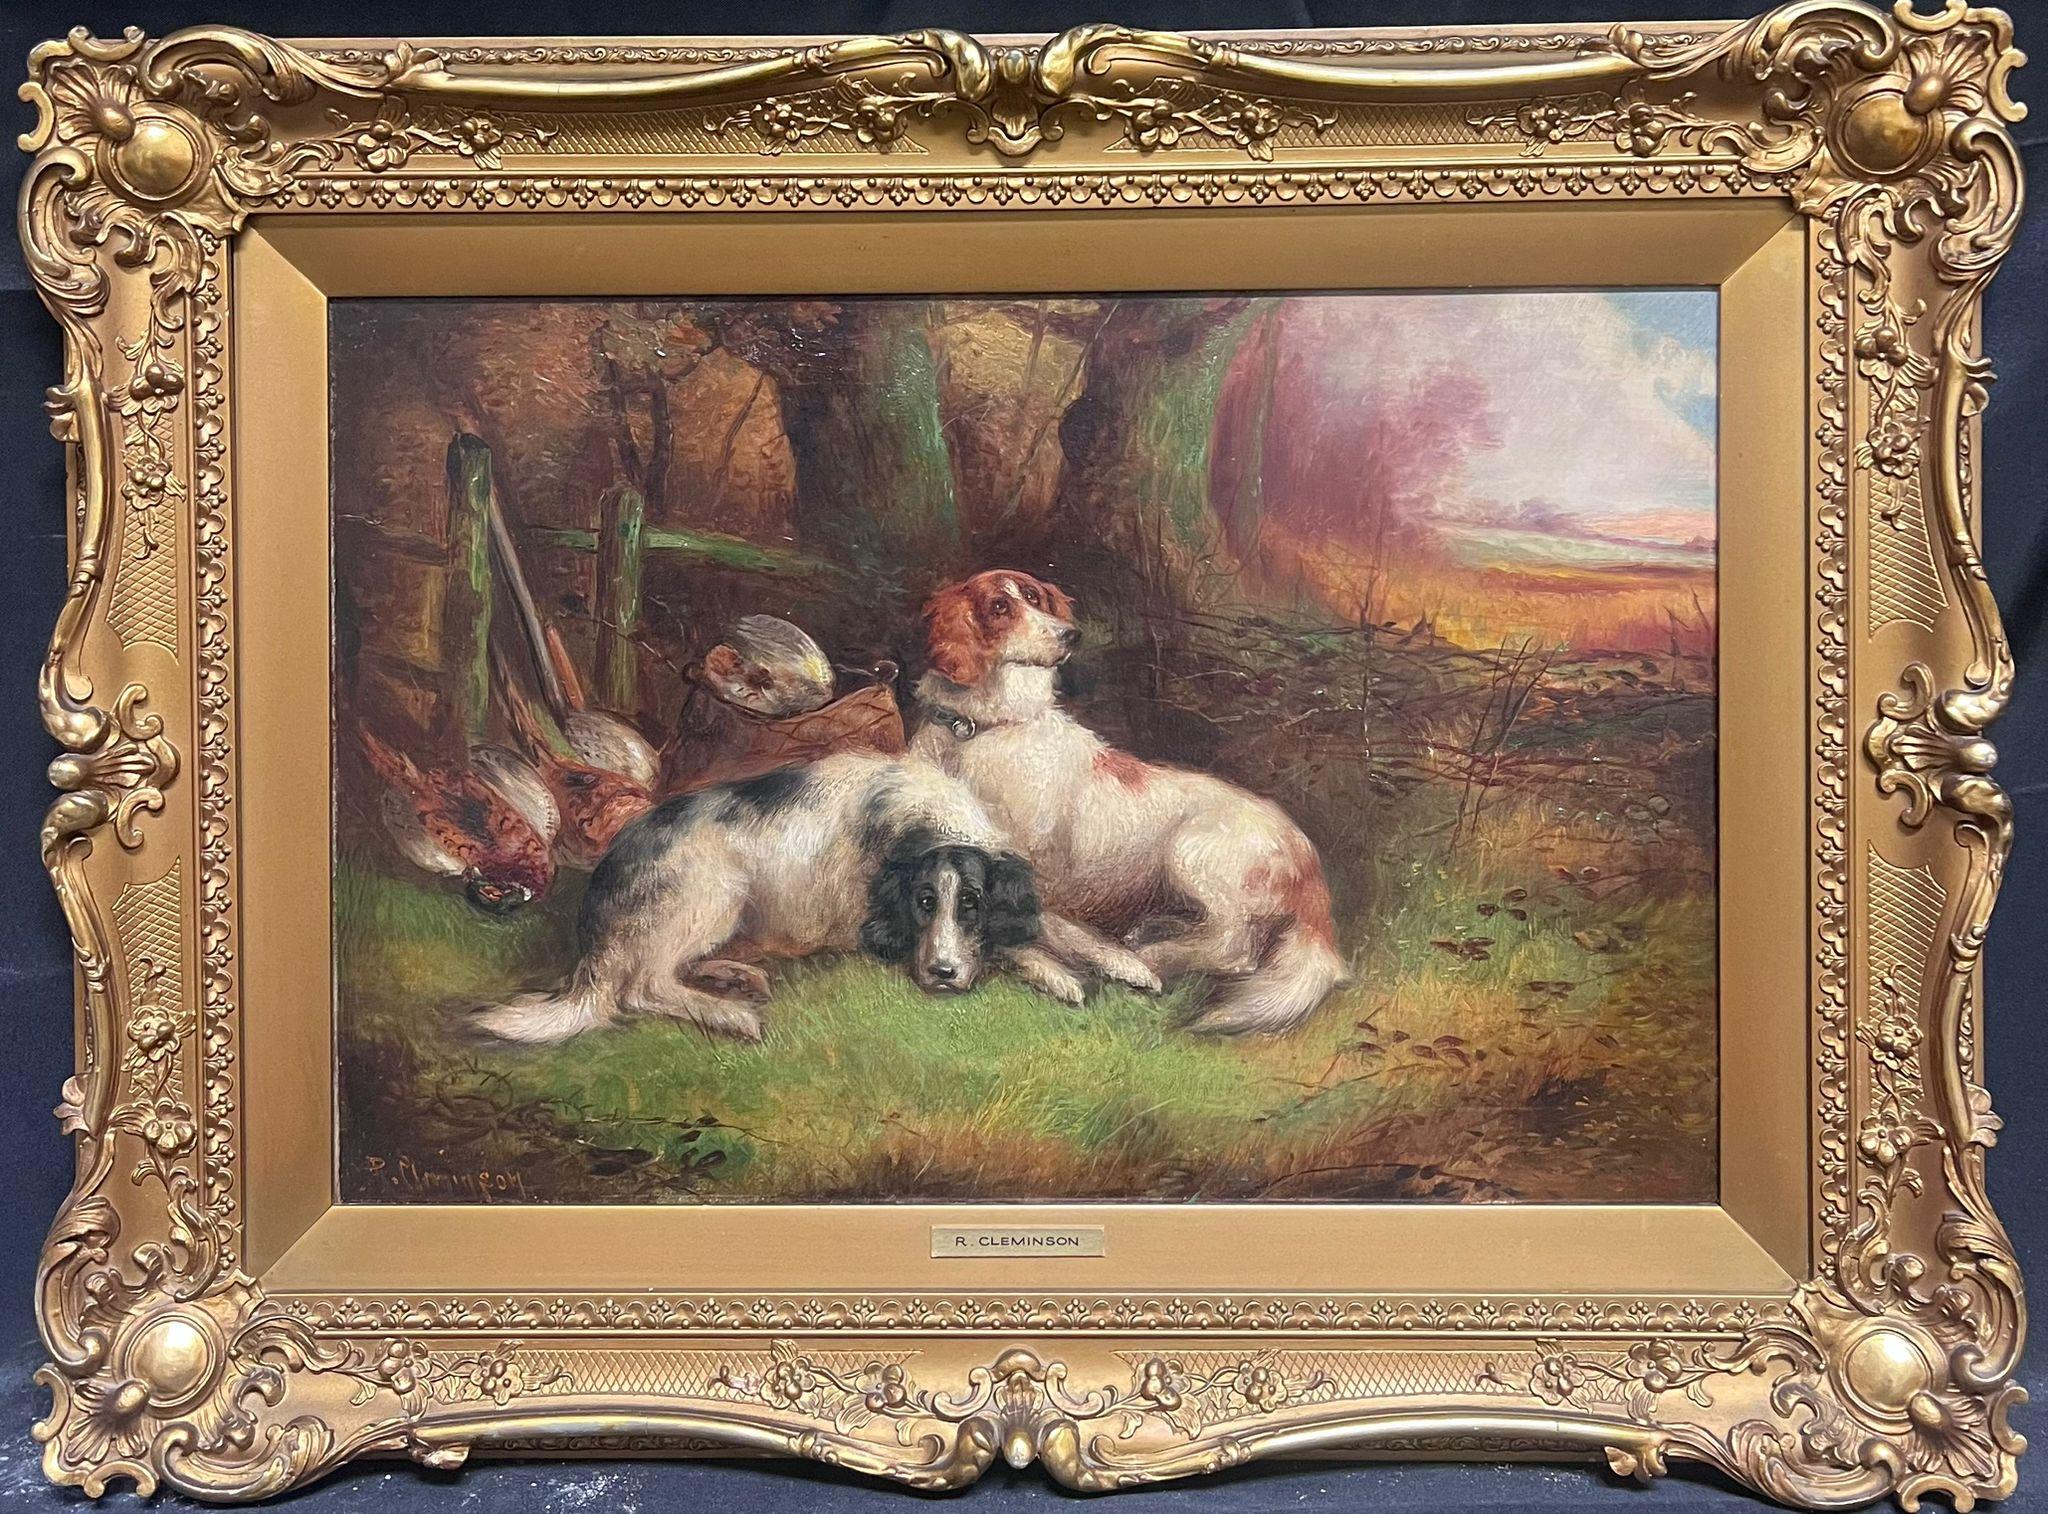 Robert Cleminson Landscape Painting - Setter Dogs/ Spaniels in Sporting Landscape Original Victorian English Dog Oil